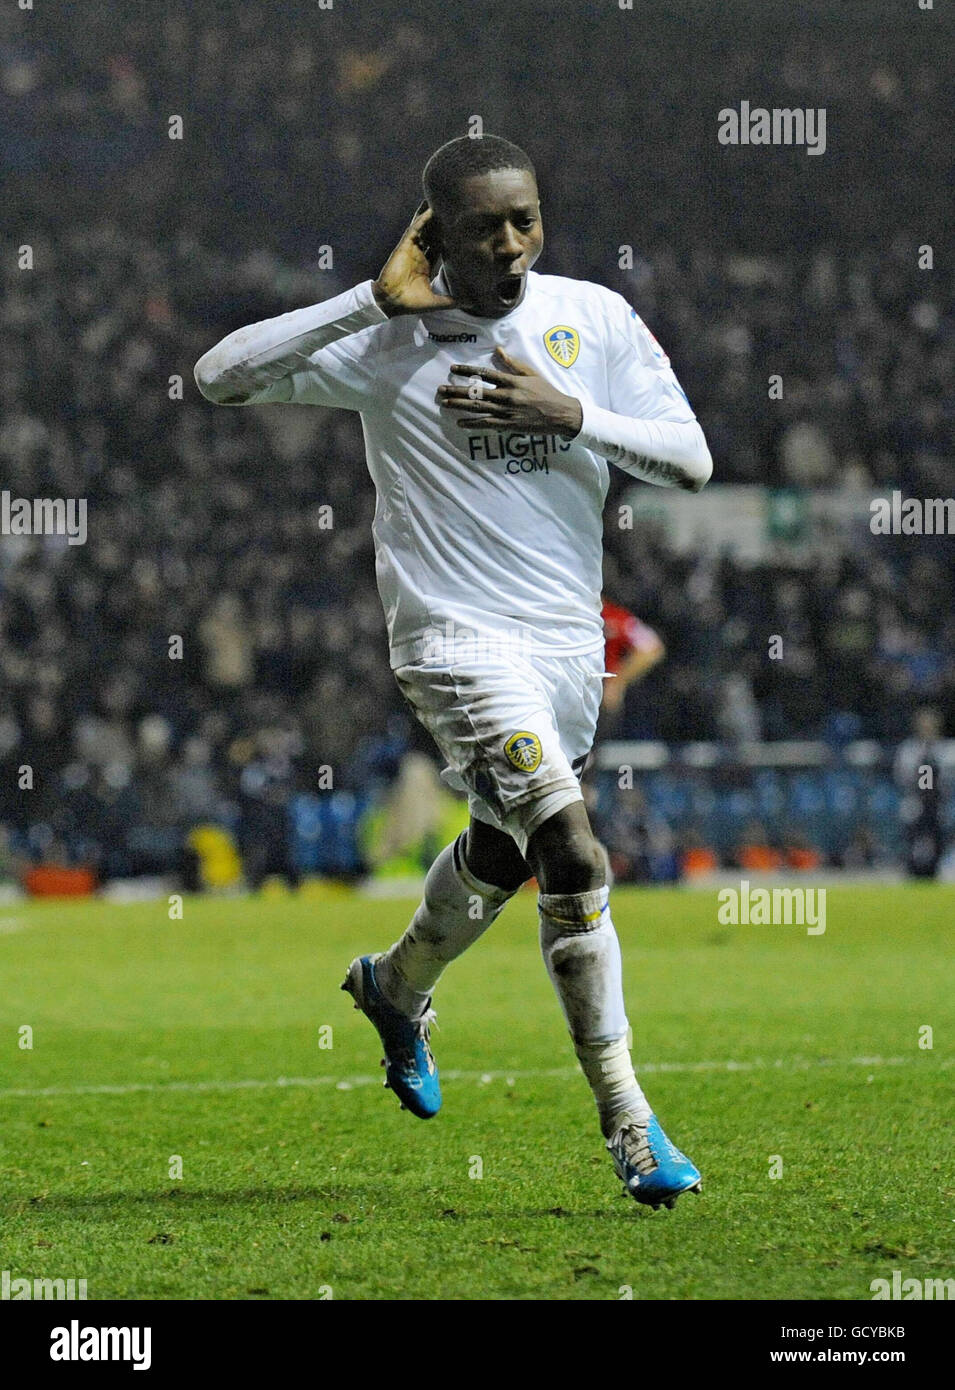 Leeds United's Max Gradel celebrates after scoring his side's second goal during the npower League Championship match at Elland Road, Leeds. Stock Photo